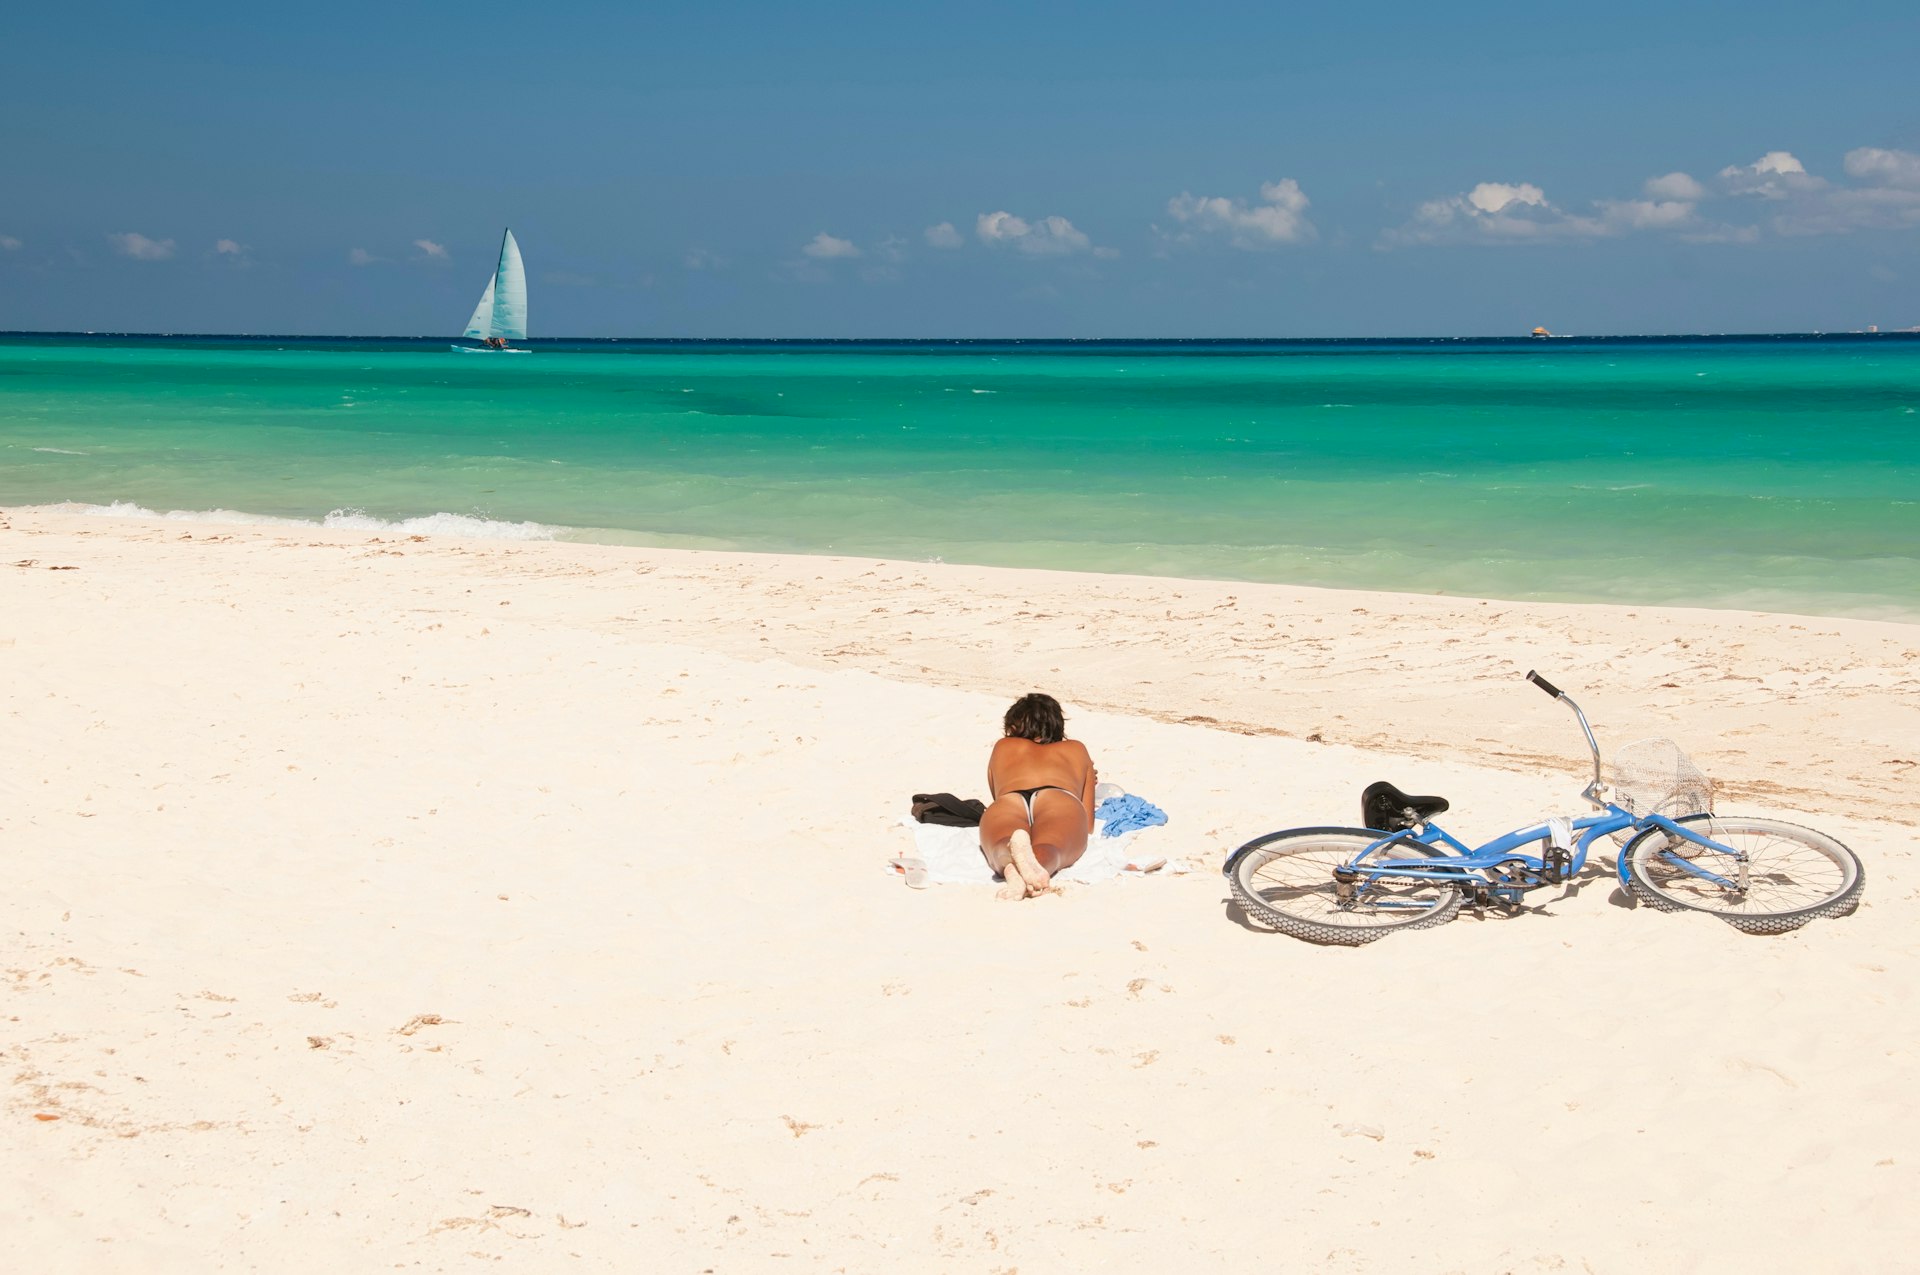 A young woman lies on the sand in a bikini, reading, next to her bicycle with a sailboat on the Caribbean Sea beyond